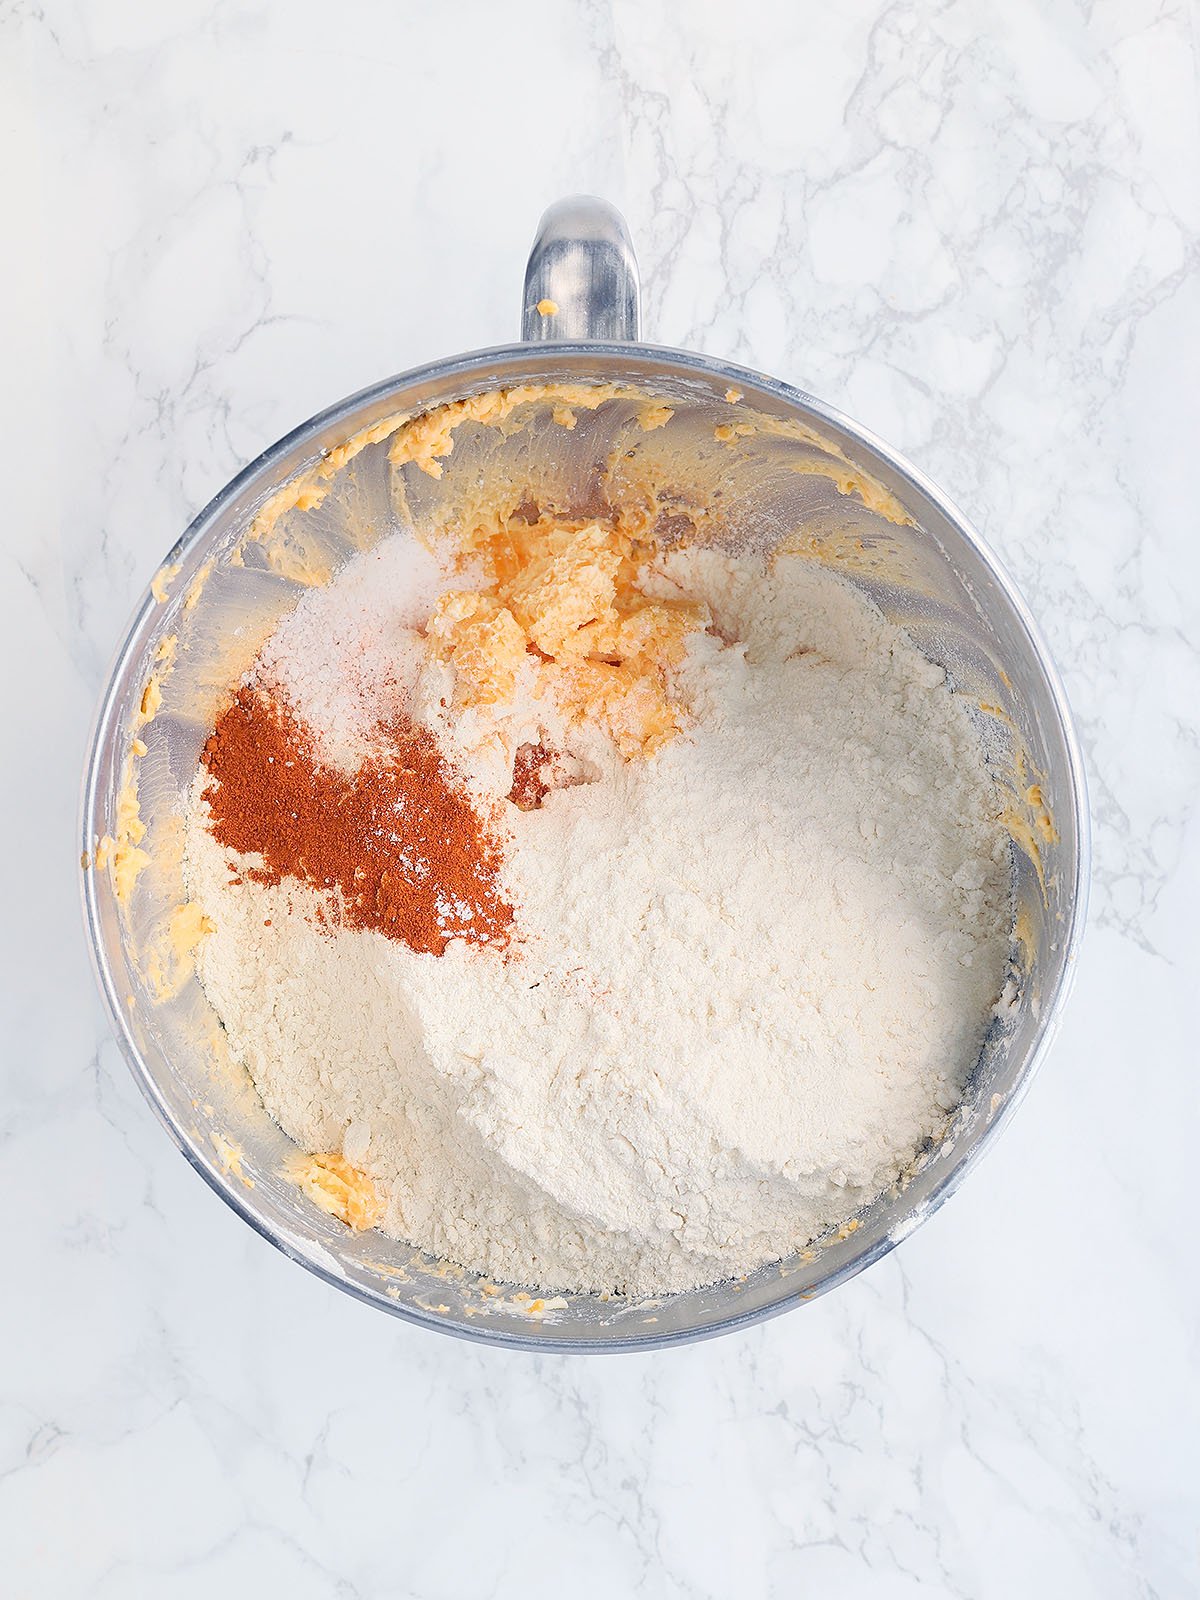 flour, salt and cayenne pepper added to the cheese mixture in a metal mixing bowl